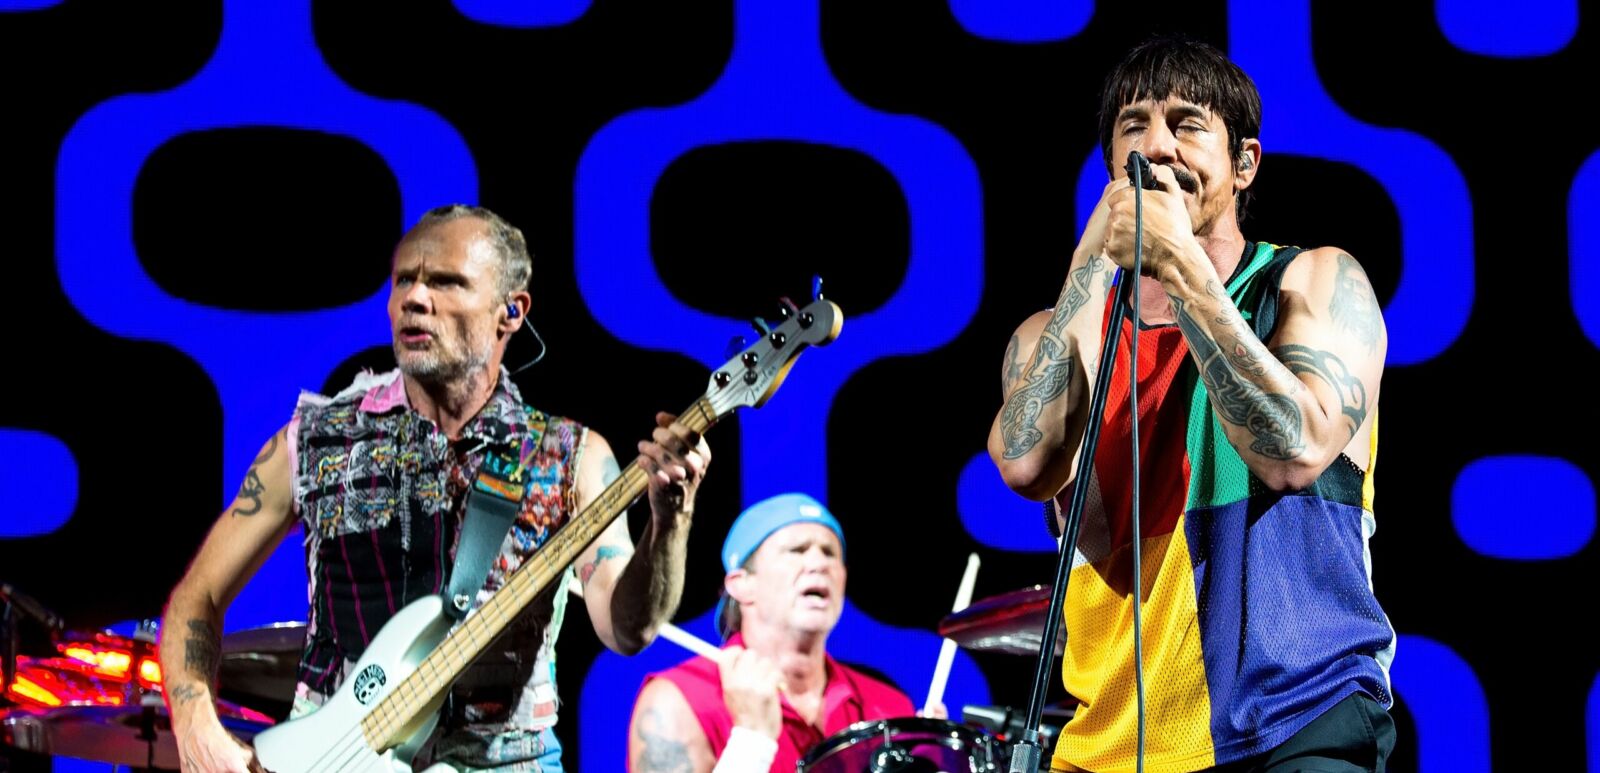 Red Hot Chili Peppers. Photo via Shutterstock.